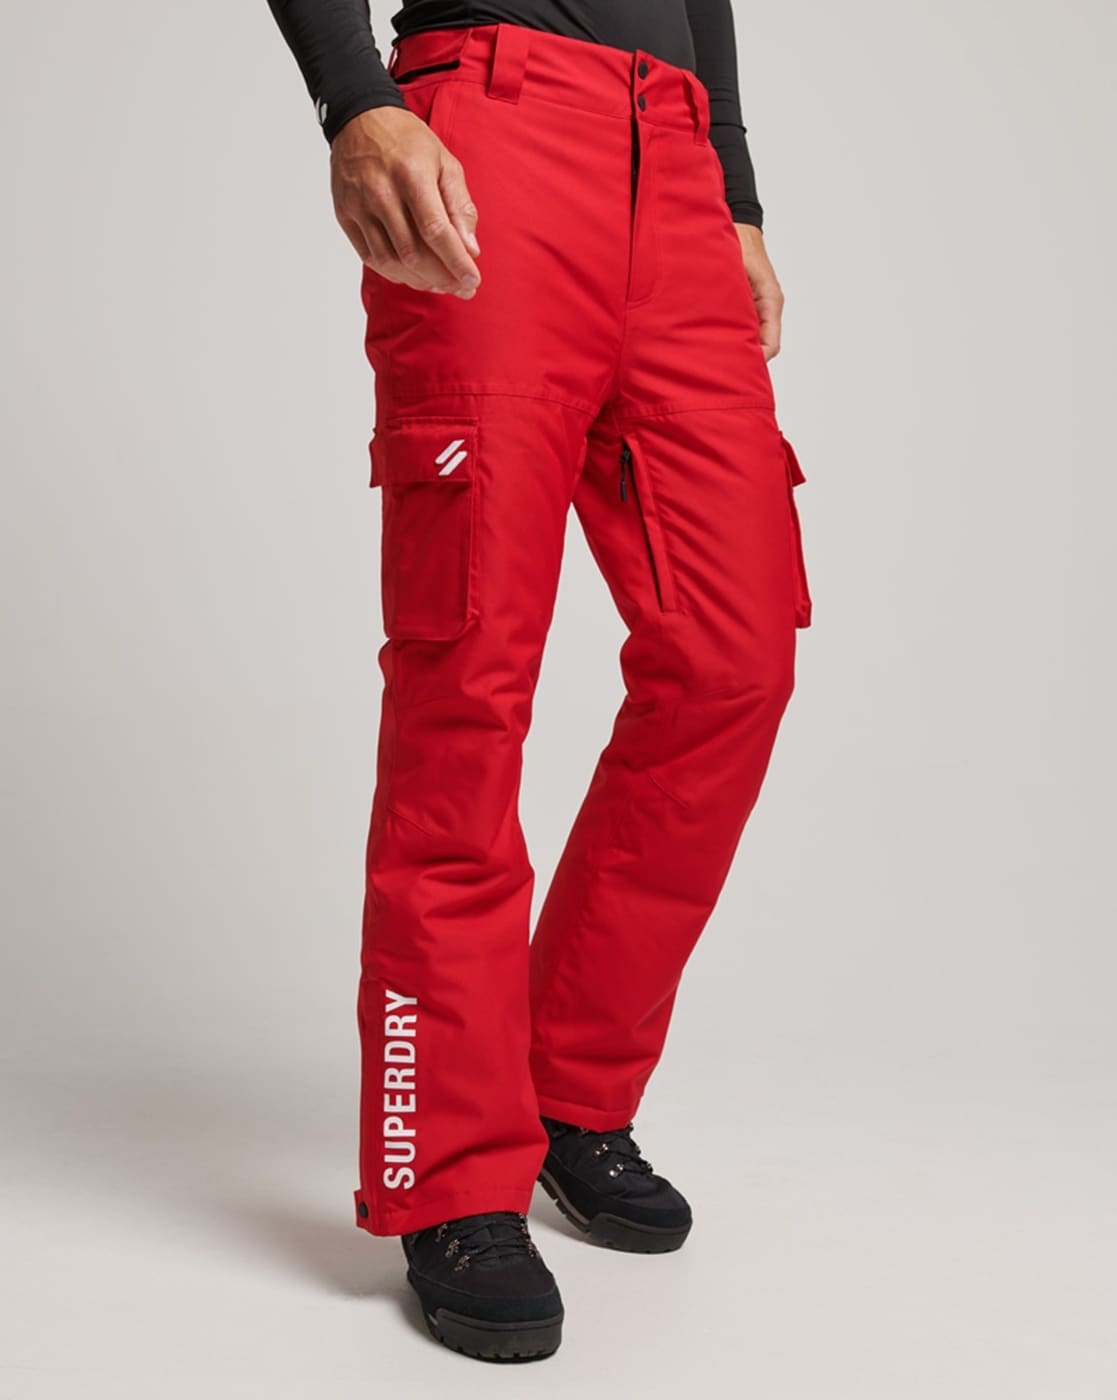 Buy RED Trousers & Pants for Men by Rare Rabbit Online | Ajio.com